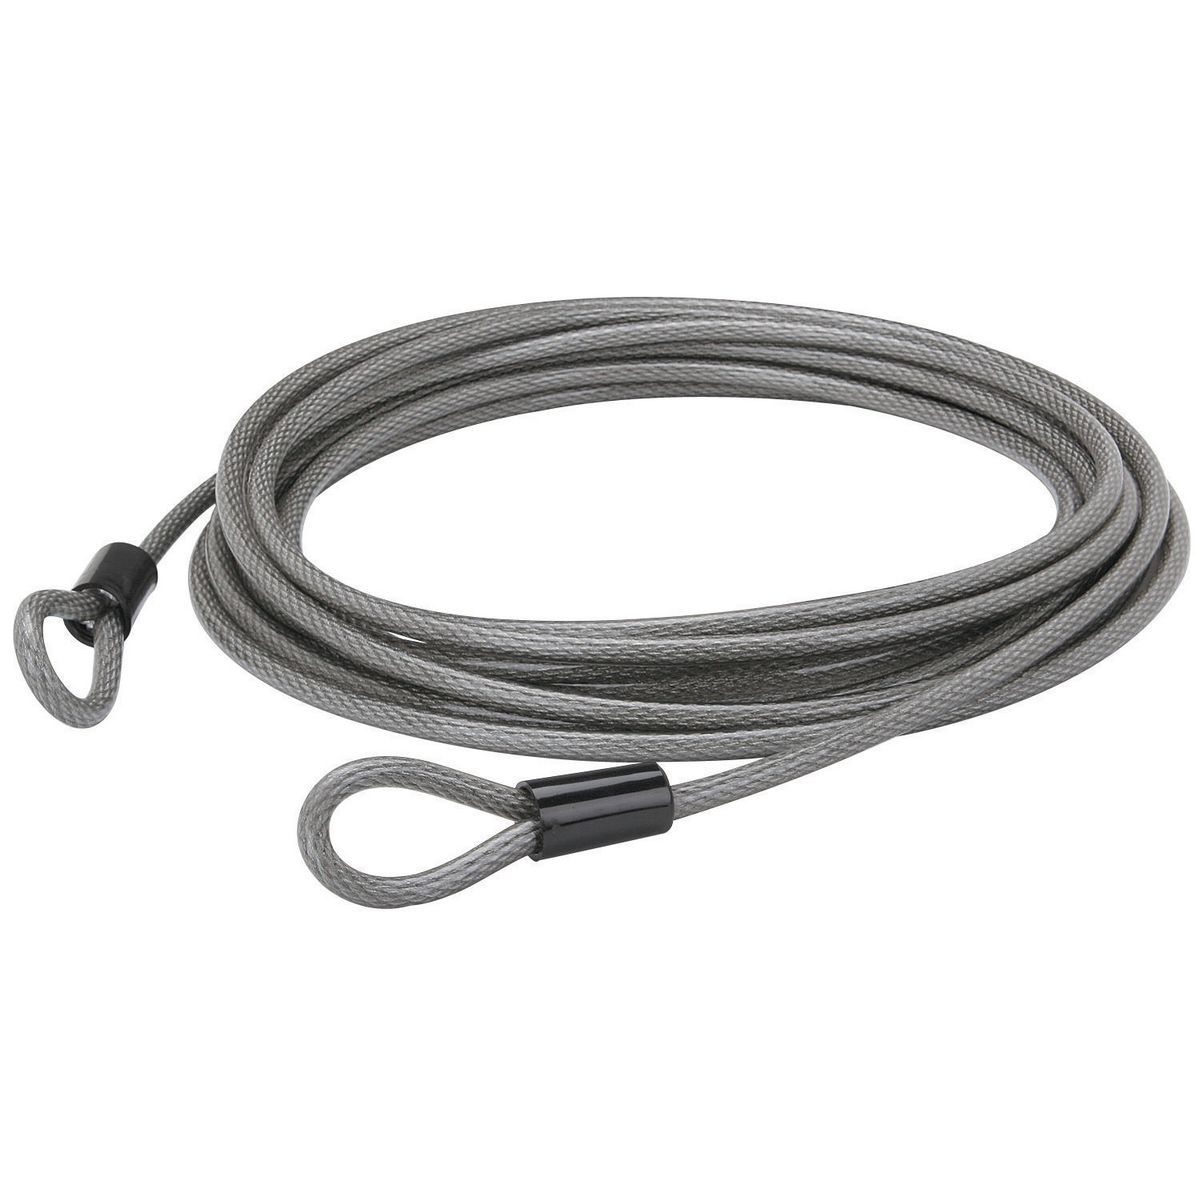 BUNKER HILL SECURITY 30 ft. x 3/8 in. Braided Steel Security Cable